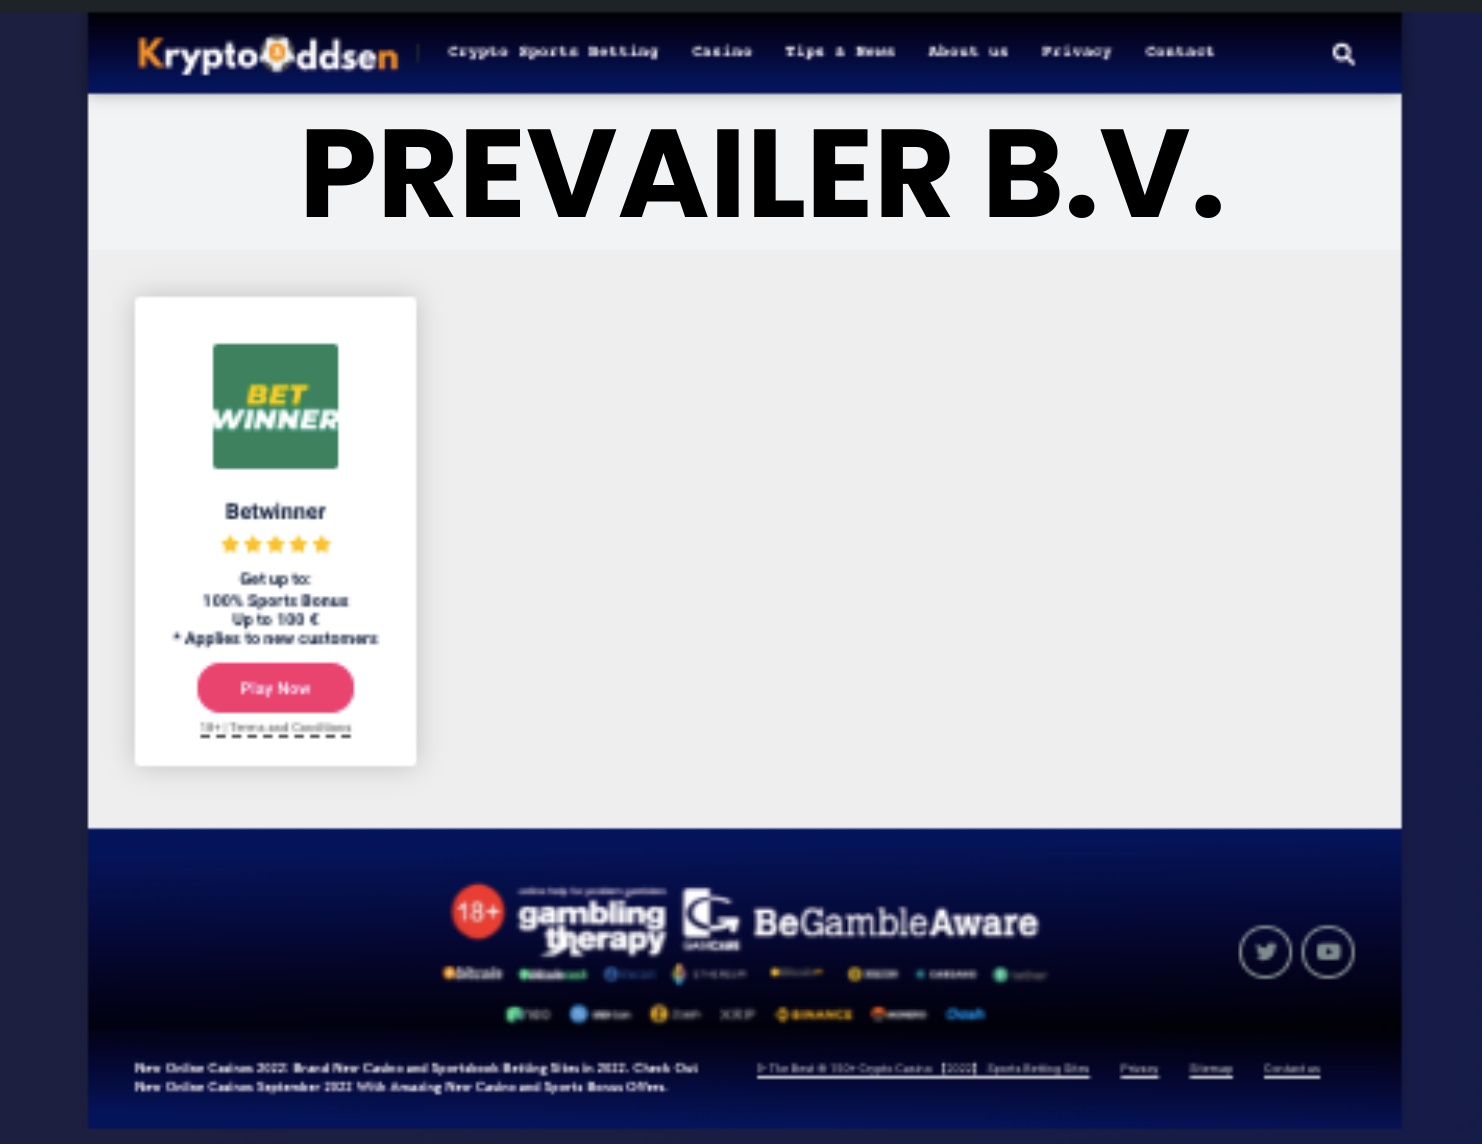 PREVAILER B.V. Casino Owned Operated